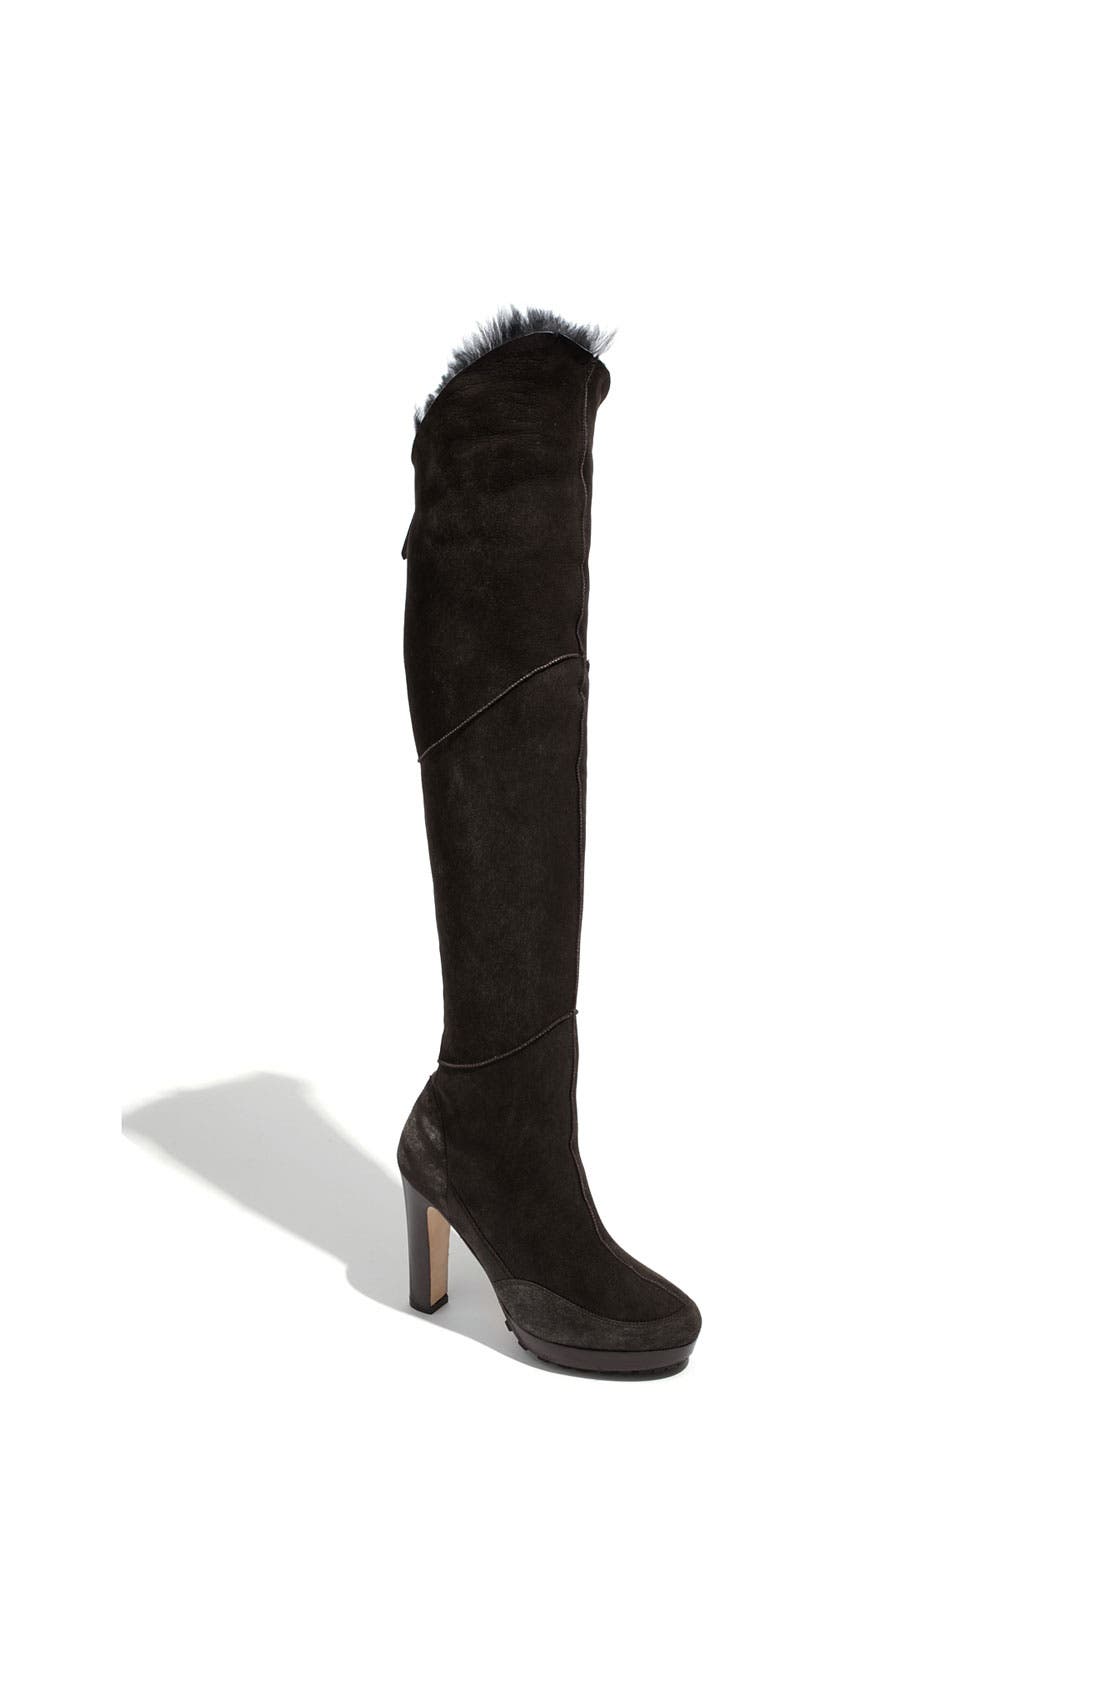 shearling over the knee ugg boots